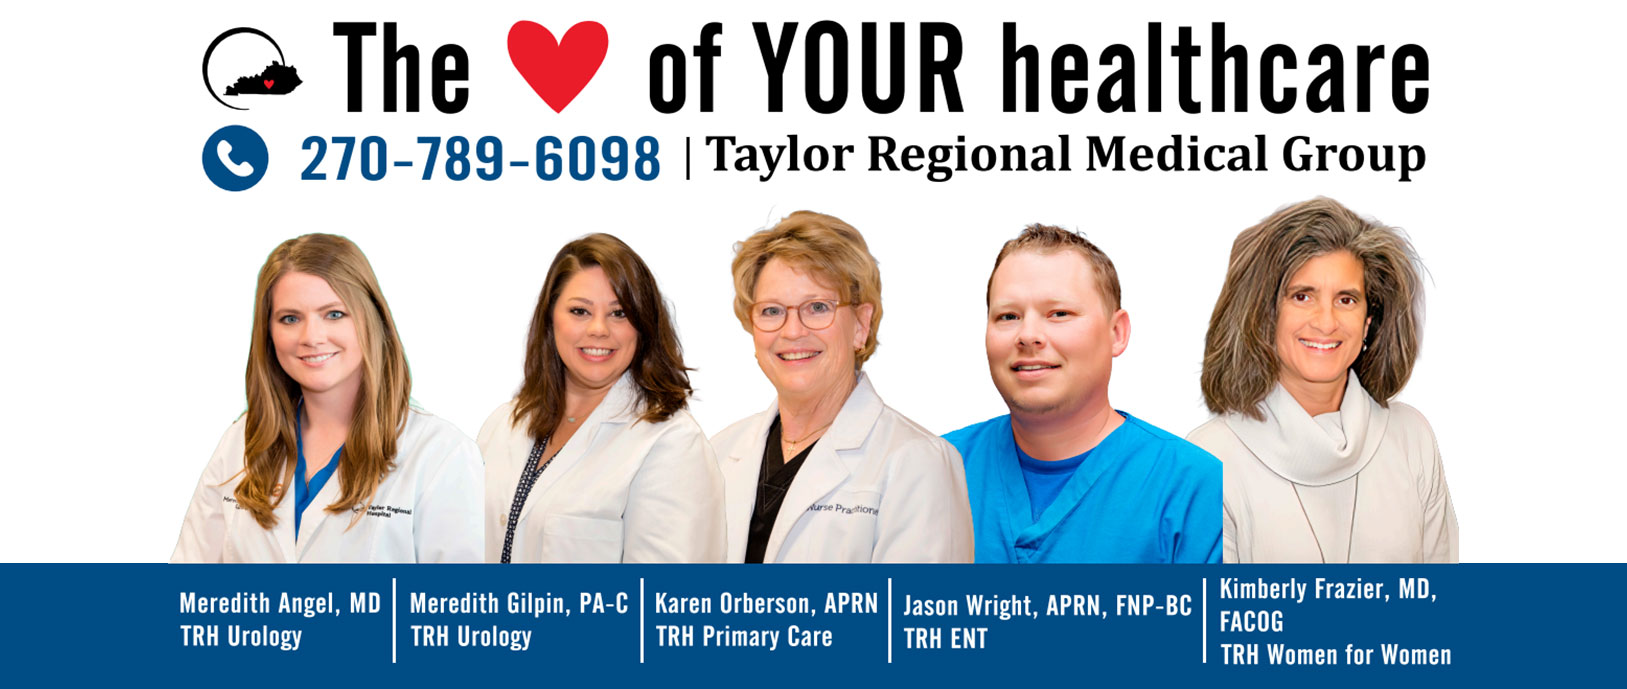 The heart of your healthcare
270-789-6098
Taylor Regional Medical Group 


Meredith Angel, MD
TRH Urology 

Meredith Gilpin, PA=C
TRH Urology 

Karen Oberson, APRN
TRH Primary Care

Jason Wright, APRN, FNP-BC
TRH ENT

Kimberly Frazier, MD,
FACOG
TRH Women for Women